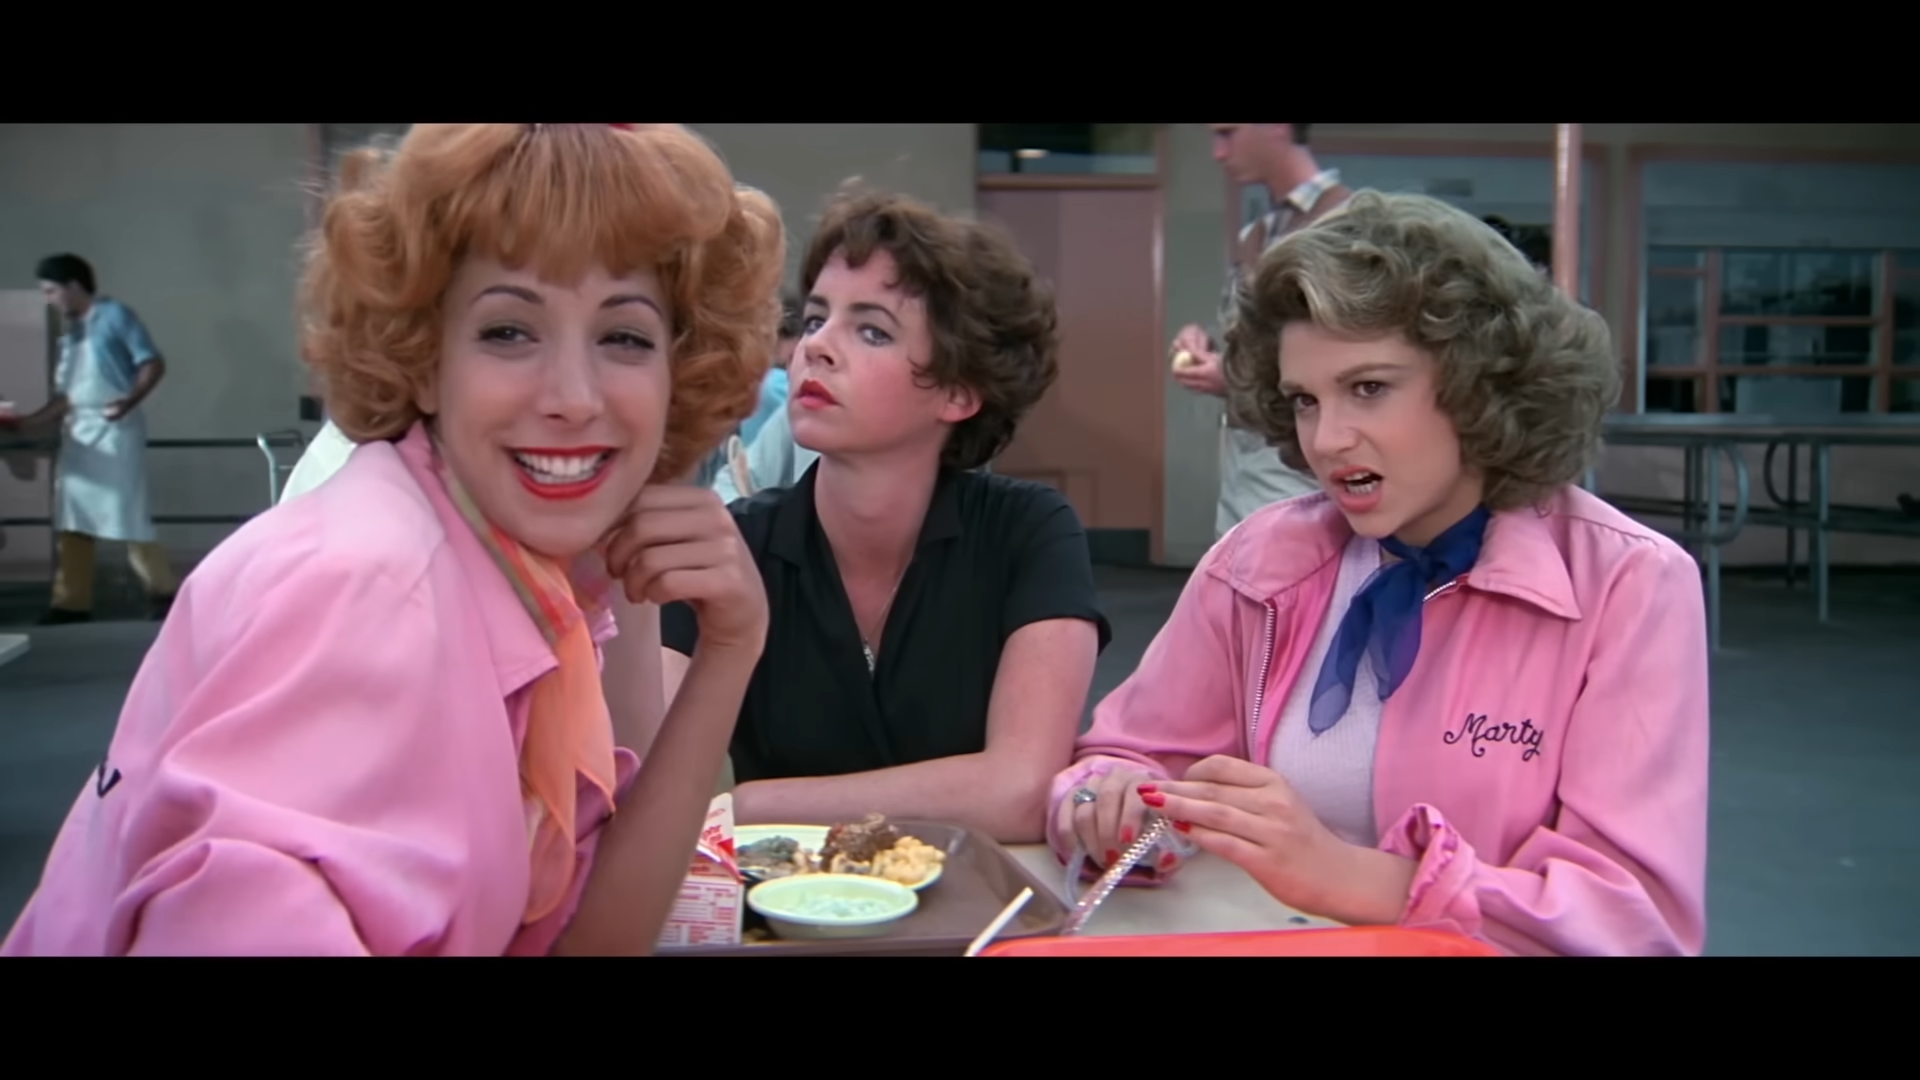 https://television.mxdwn.com/wp-content/uploads/2022/12/GREASE-_-Trailer-_-Paramount-Movies-0-12-screenshot.png